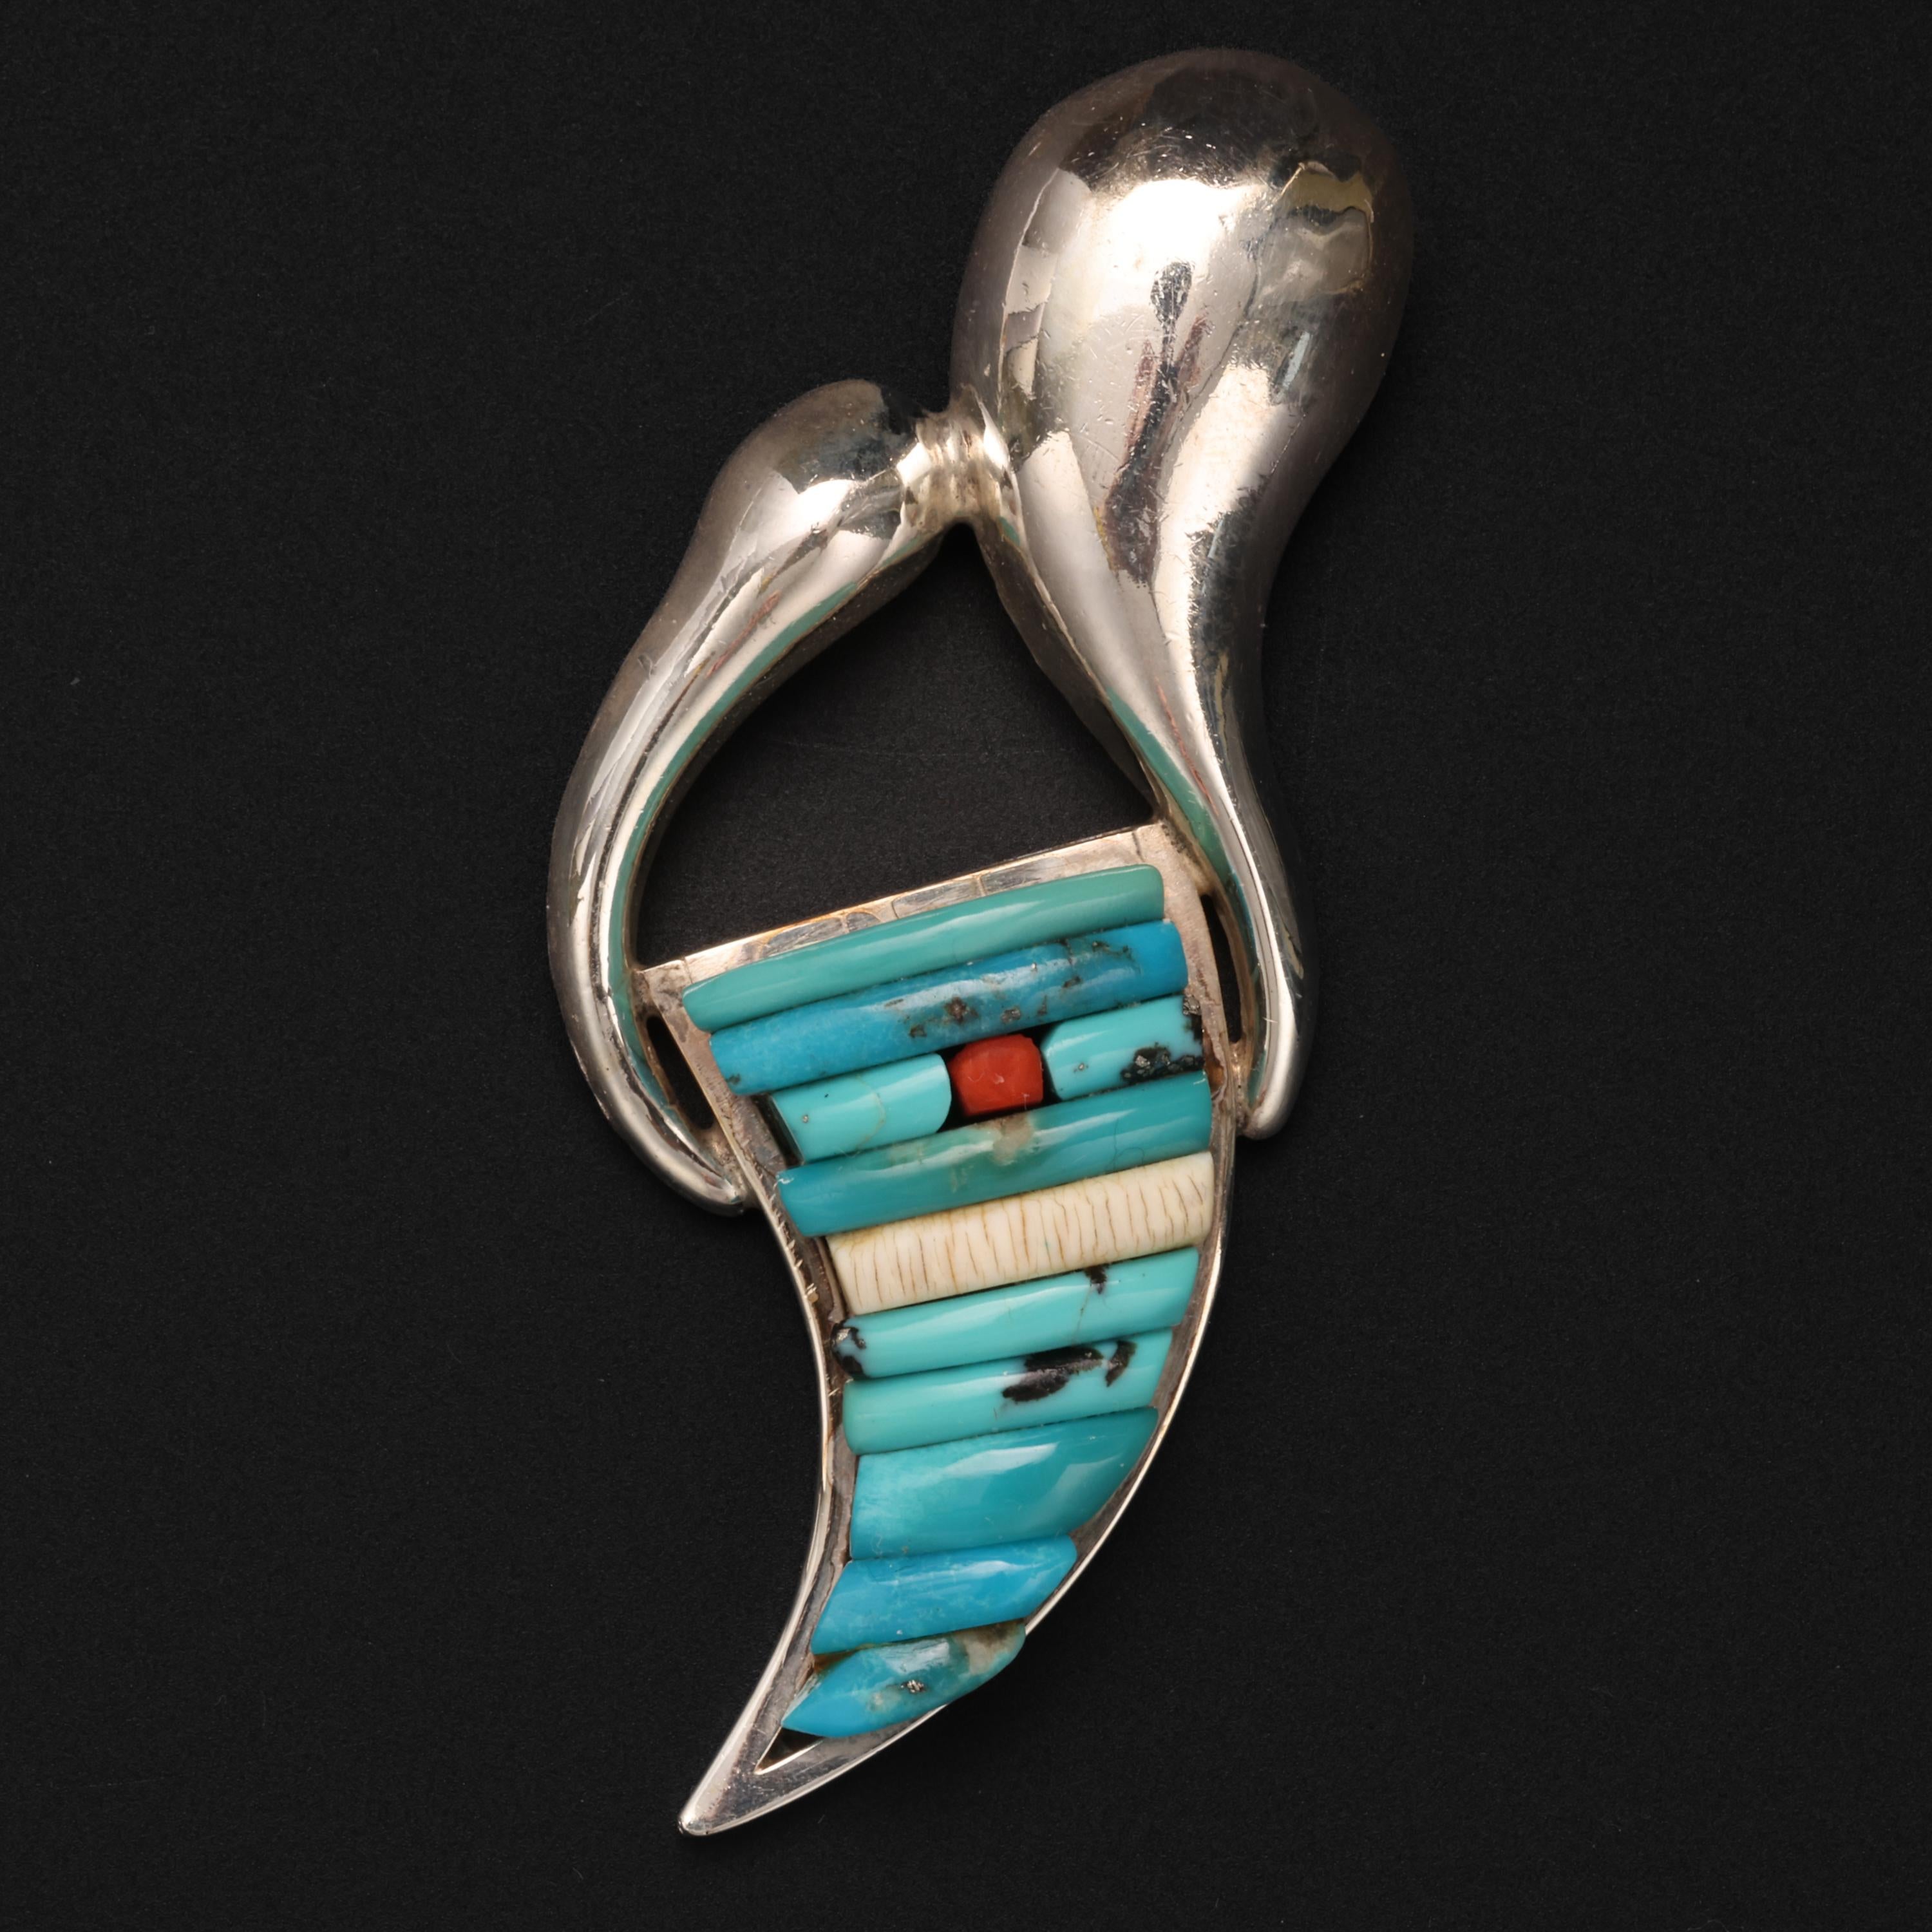 This signed, handmade pendant was created in sterling silver, turquoise, bone, and coral by noted Navajo artist, Pete Sierra. Sierra, who studied under Hopi artist Charles Loloma, has created his own highly sought-after style. 

This gorgeous and